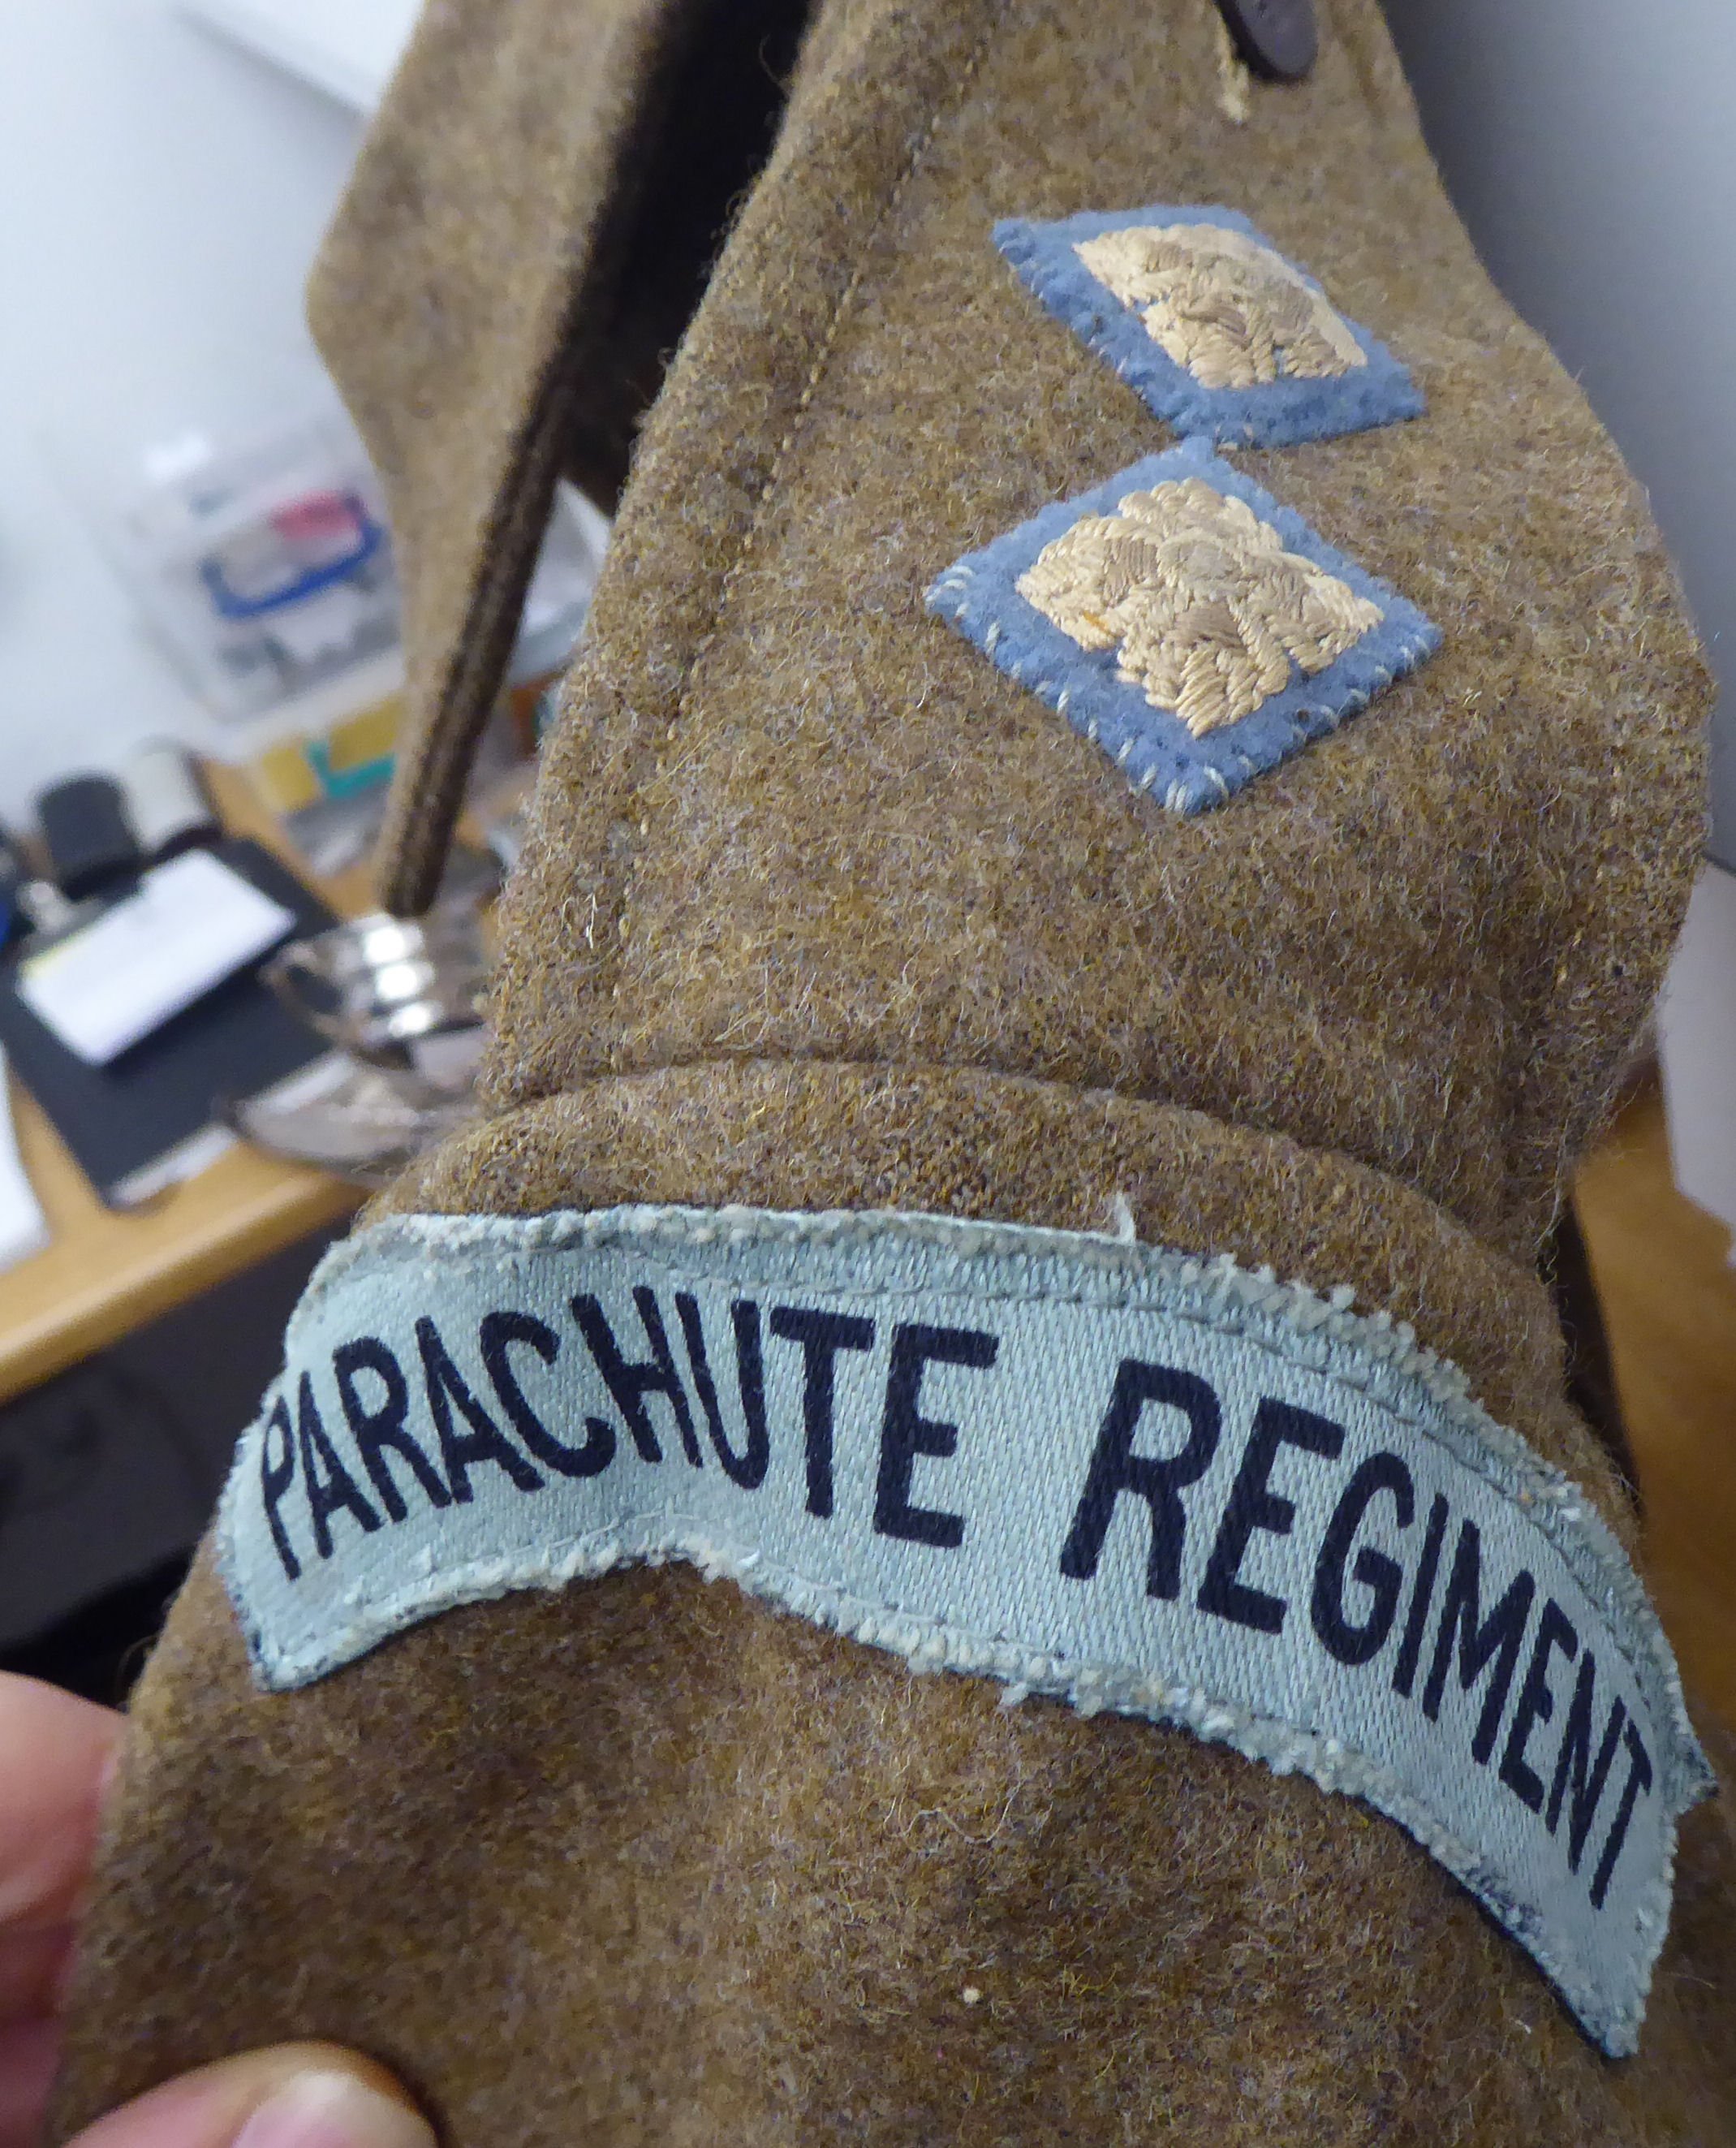 A 1943 dated British Parachute Regiment officers battledress with a lanyard and a pair of - Image 6 of 14